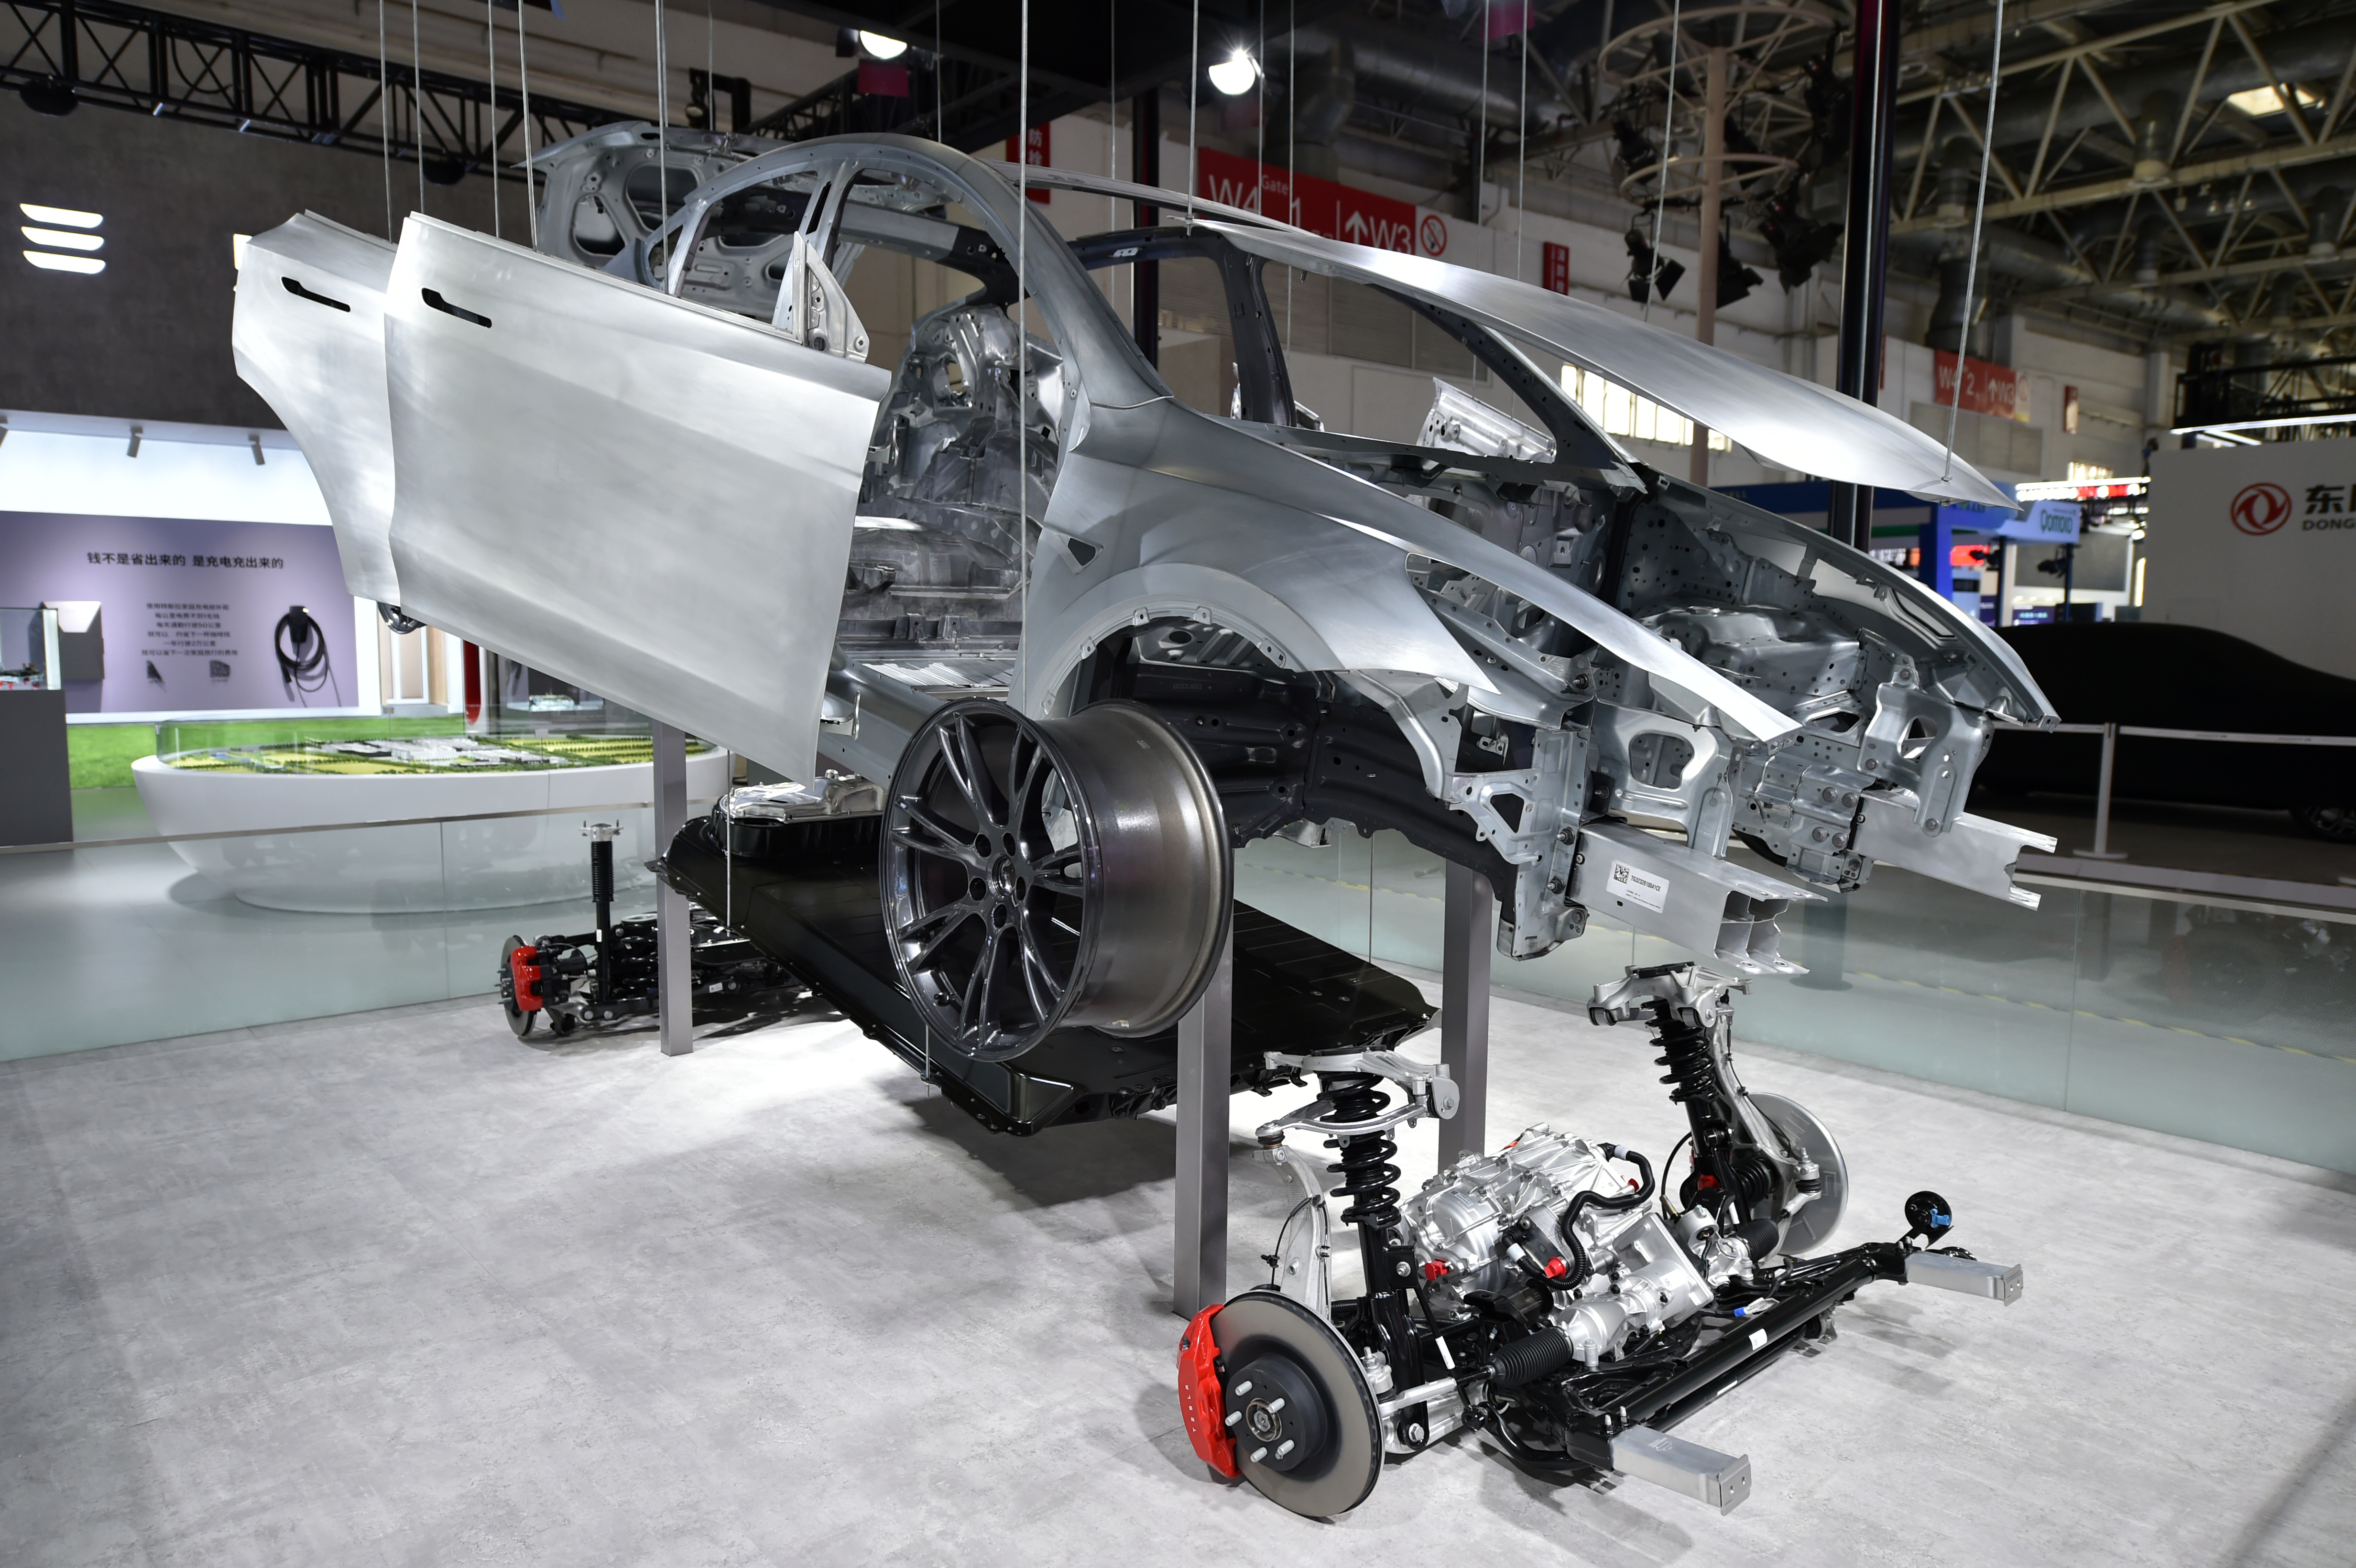 The body structure of Model Y was exhibited at the stand of Tesla. (China News Network/Li Jun)